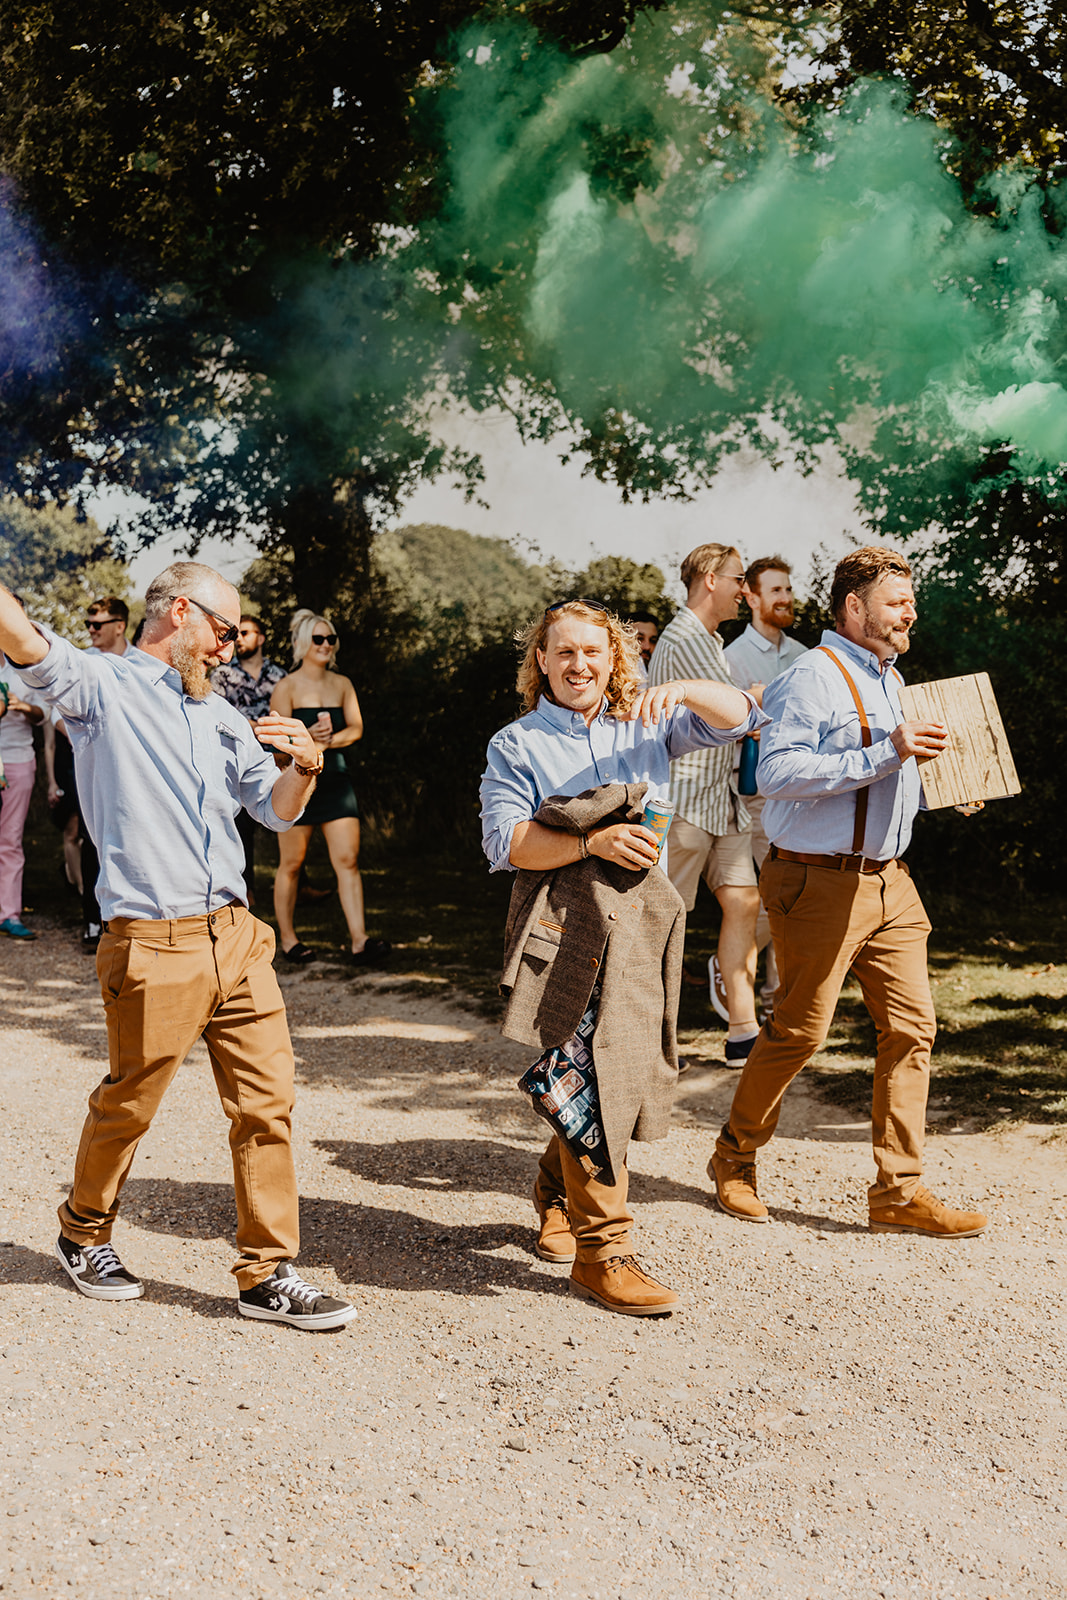 Brass marching band procession at a wedding at Mac's Farm in Sussex. By OliveJoy Photography.